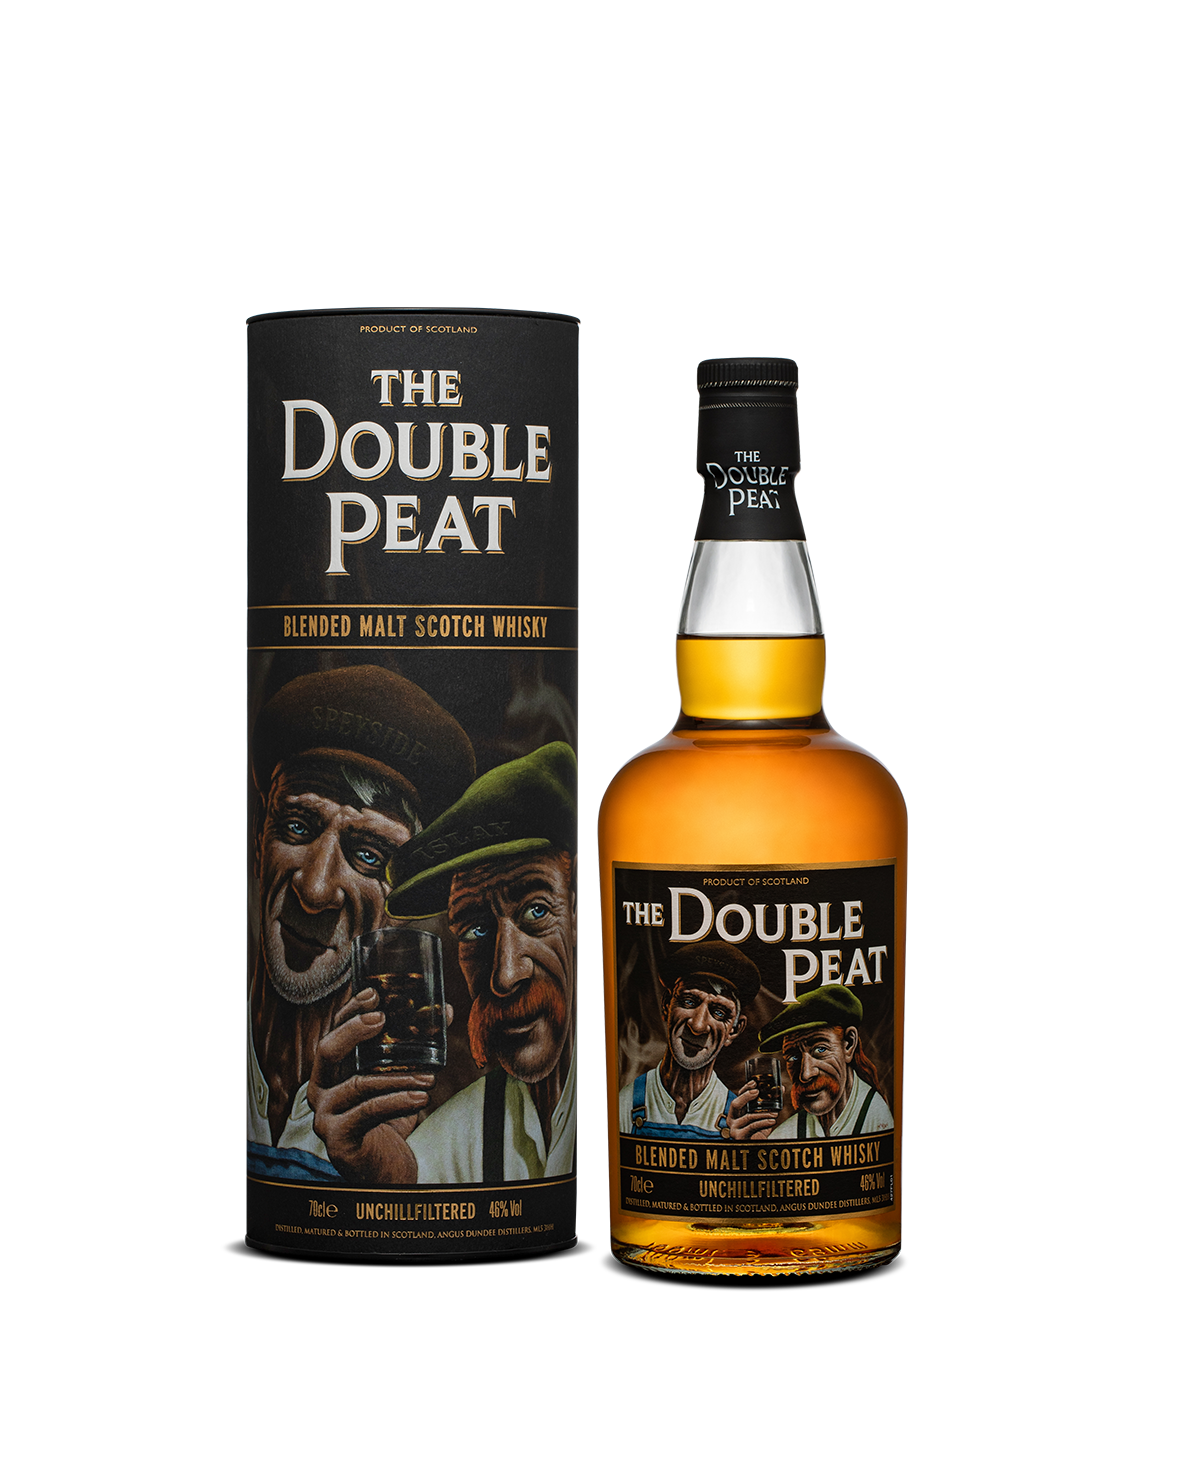 The Double Peat Blended Malt Scotch Whisky